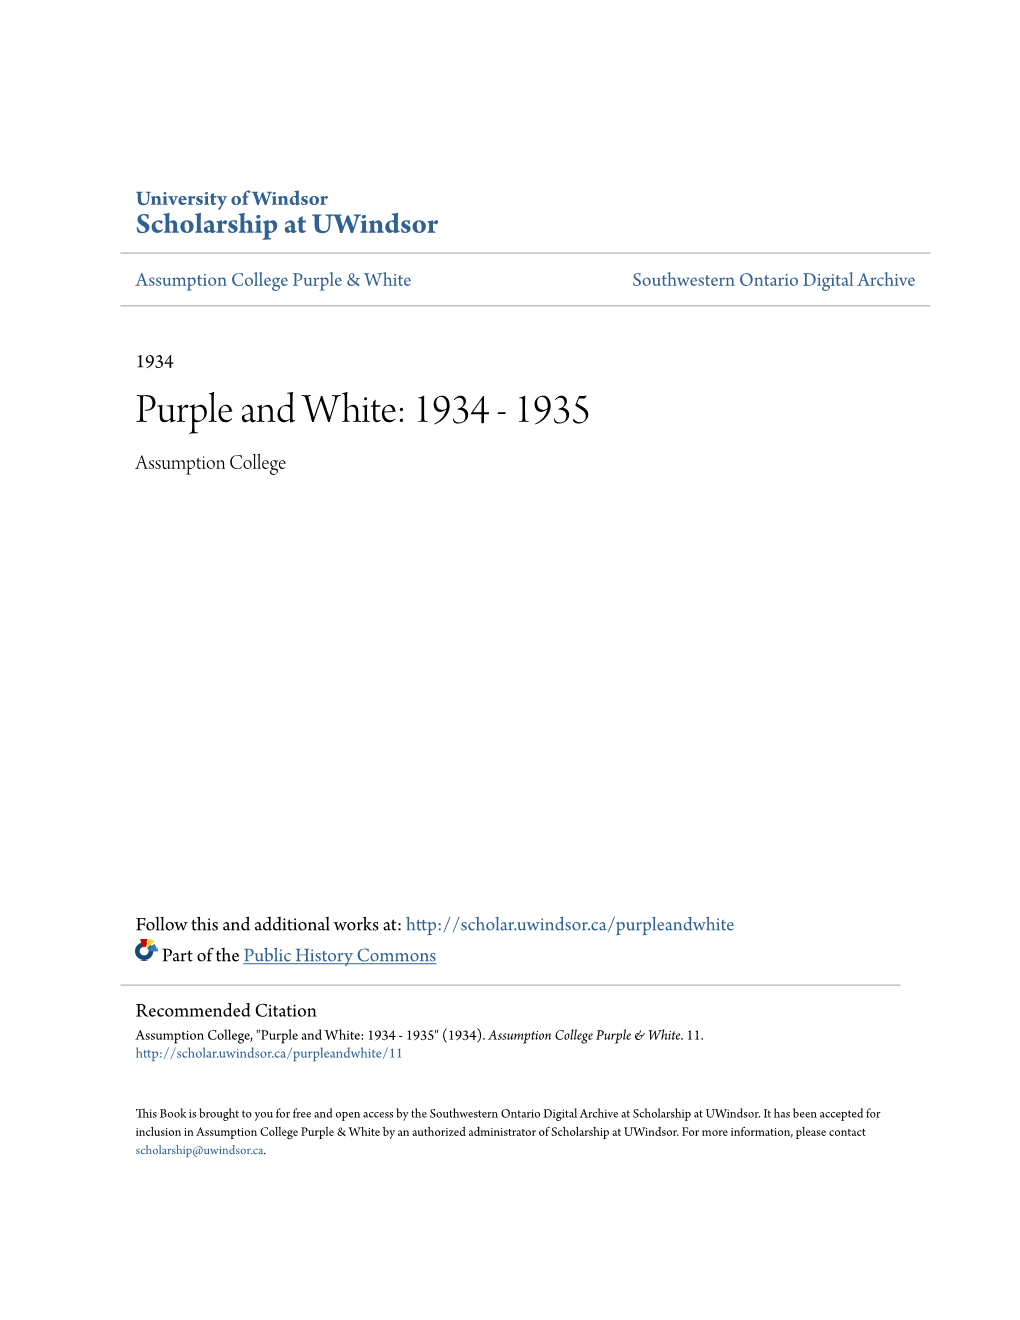 Purple and White: 1934 - 1935 Assumption College